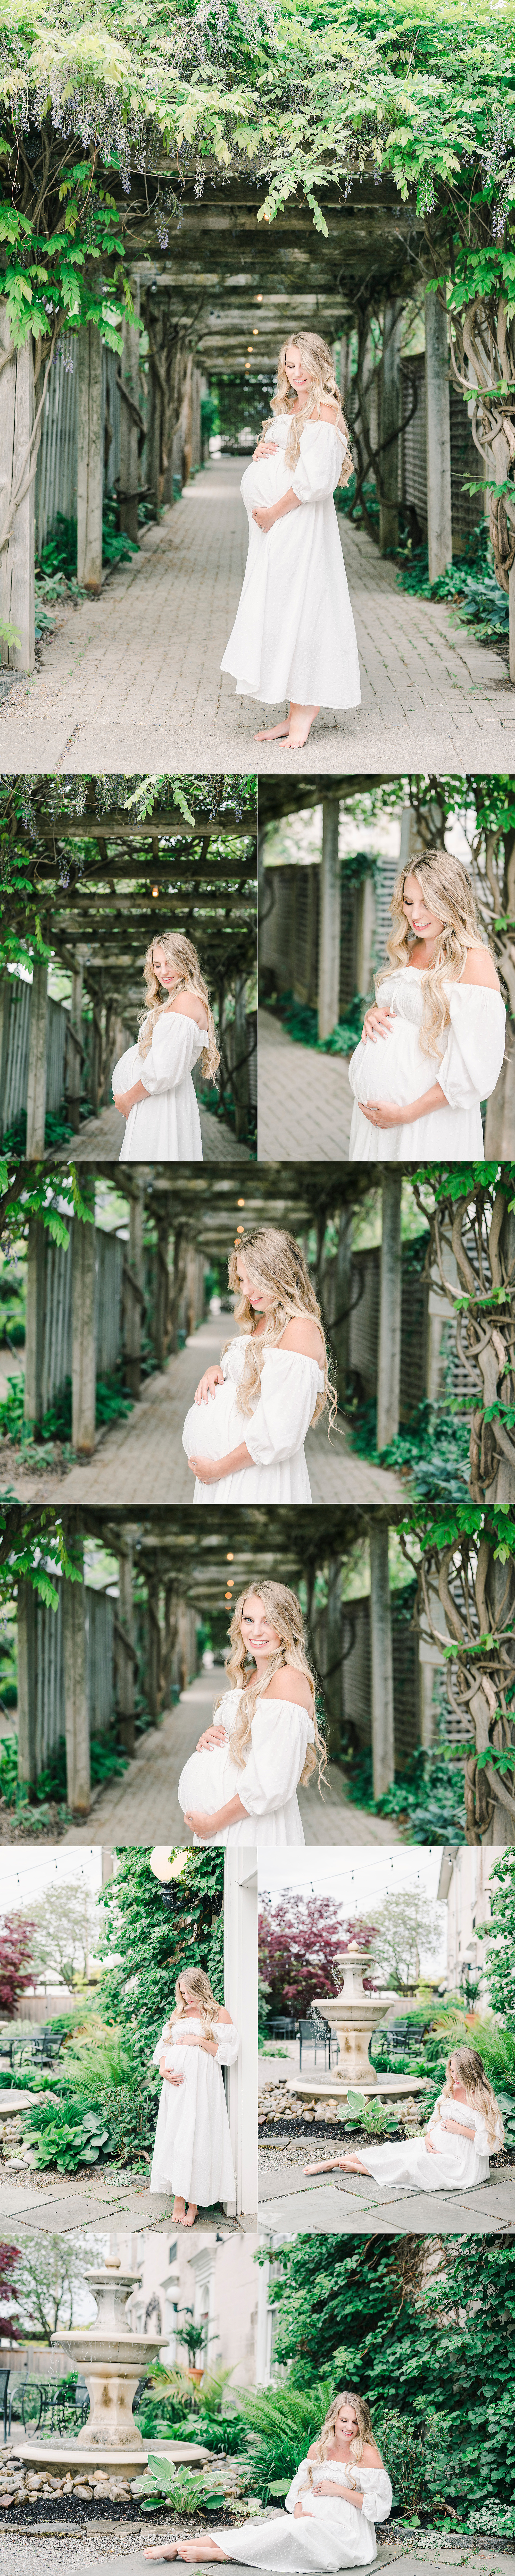 maternity session in wisteria blooms